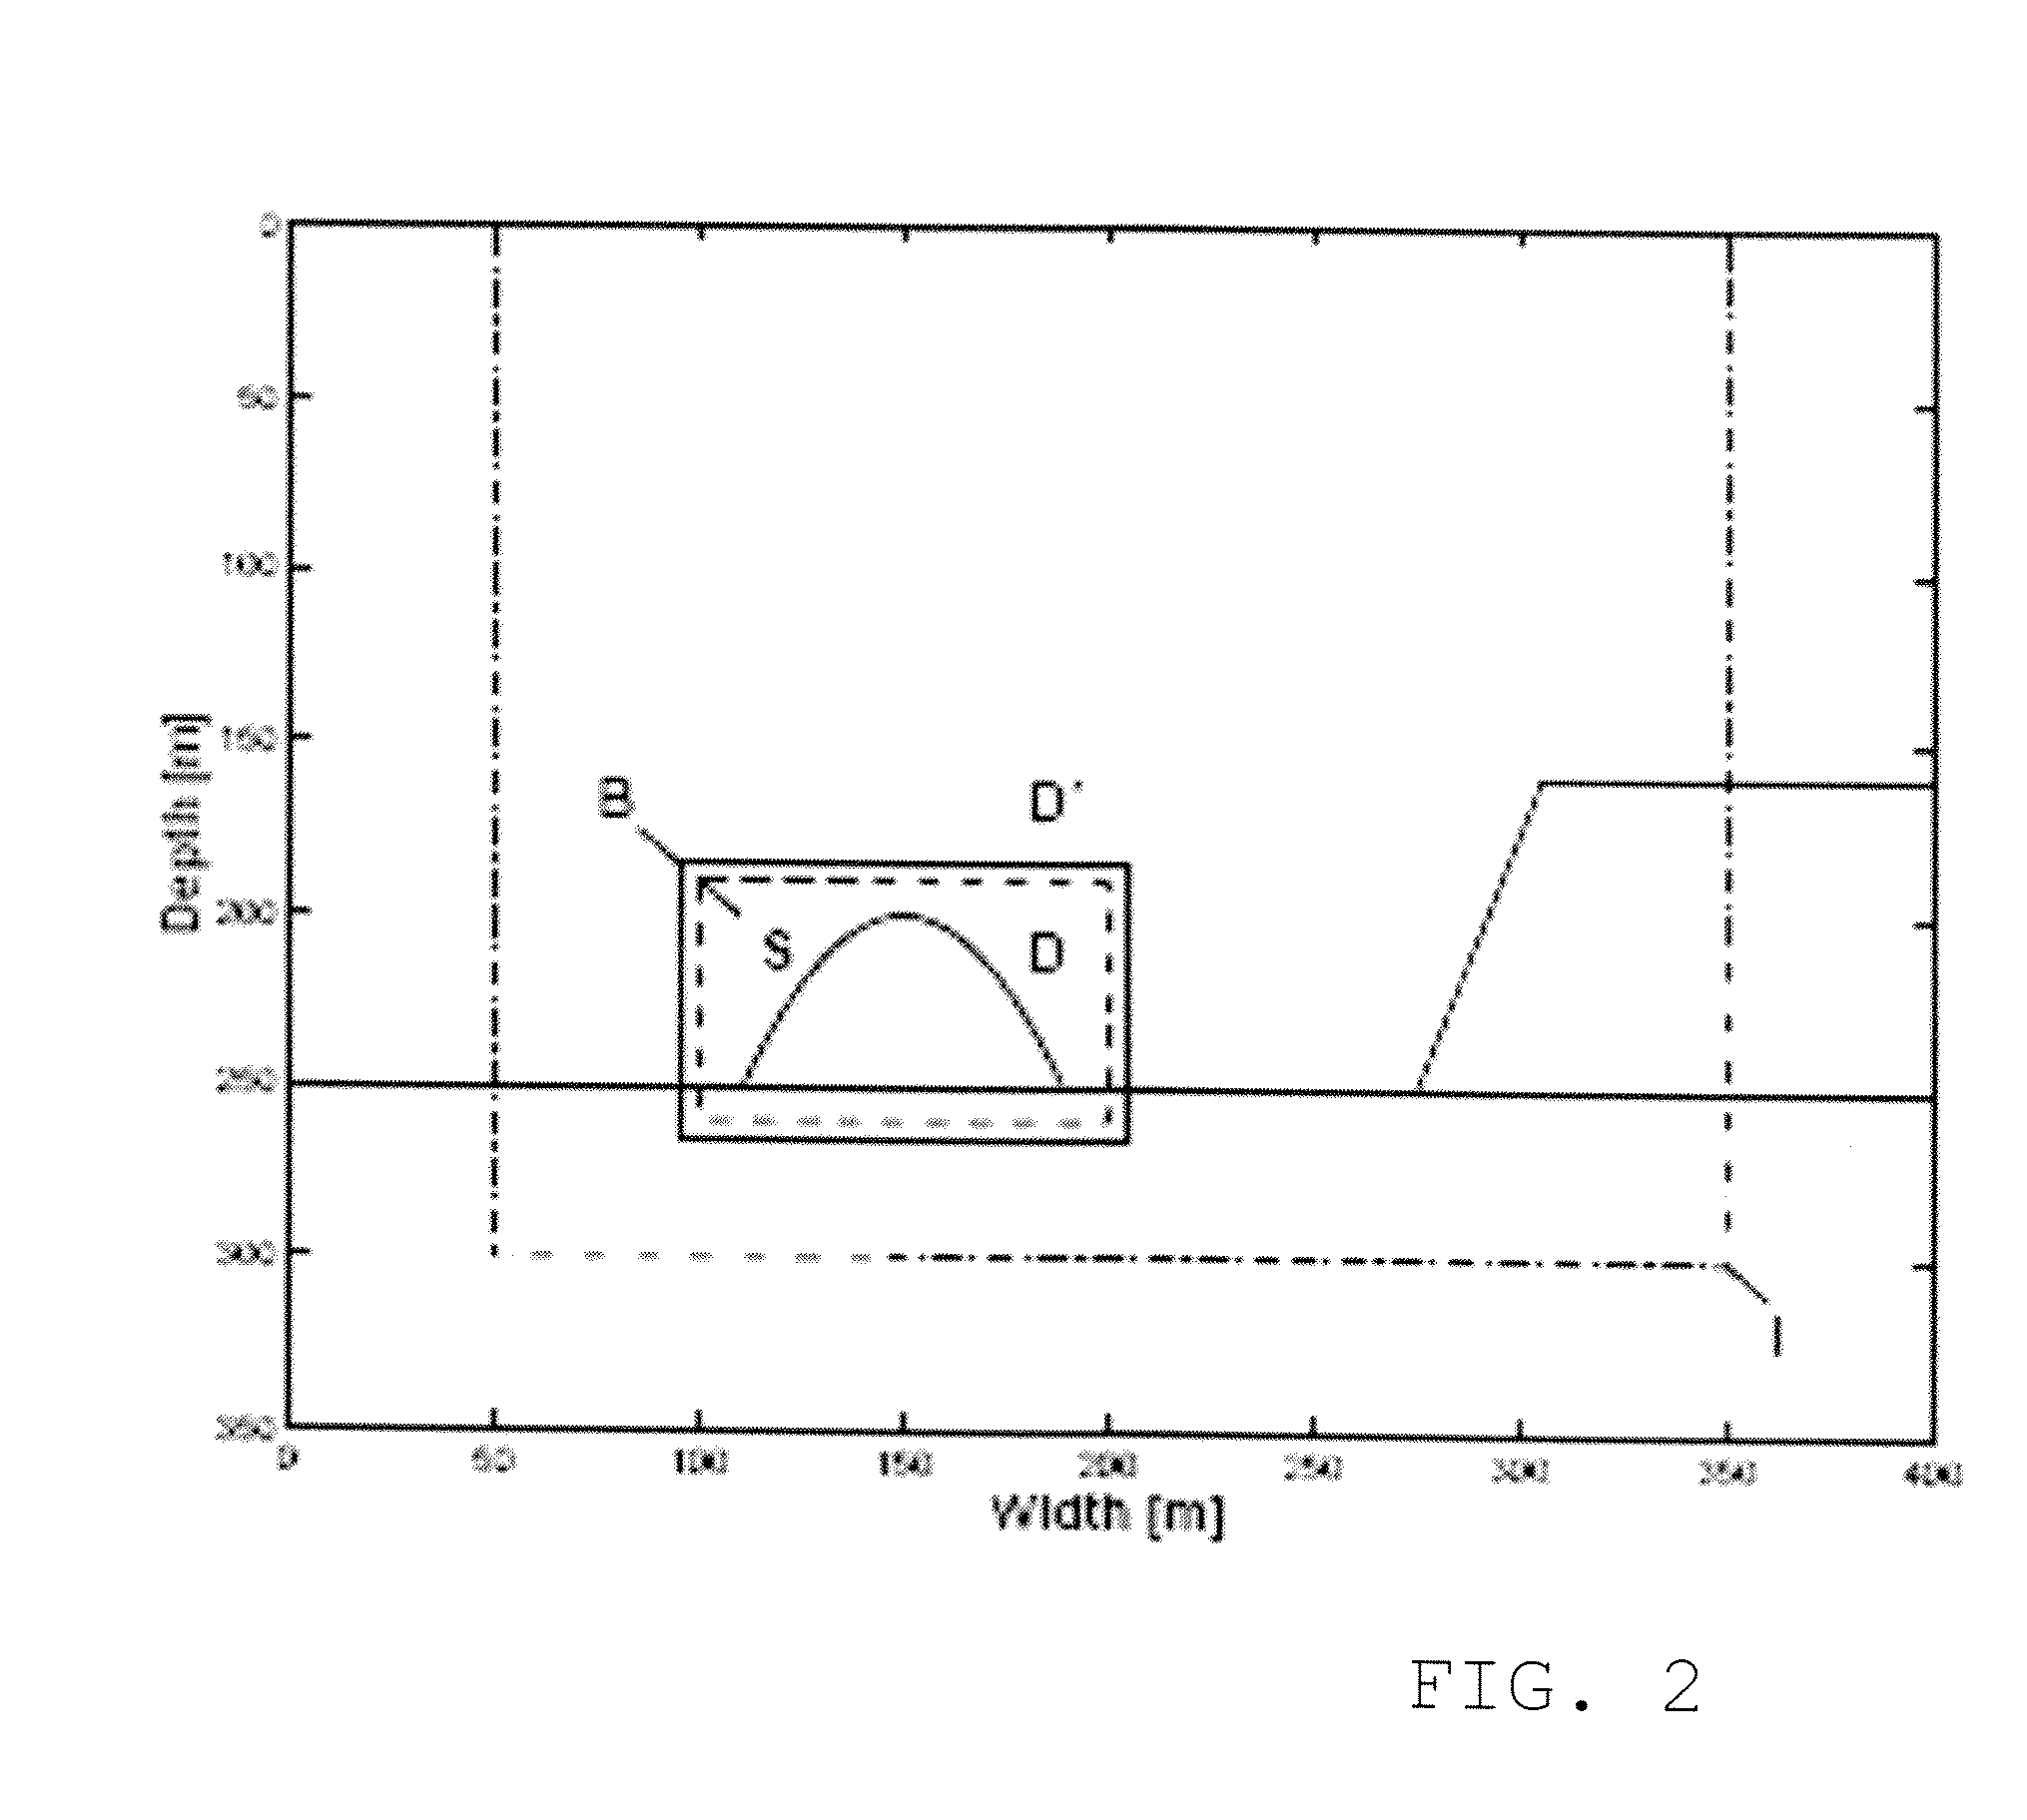 Method of Evaluating the Interaction Between a Wavefield and a Solid Body